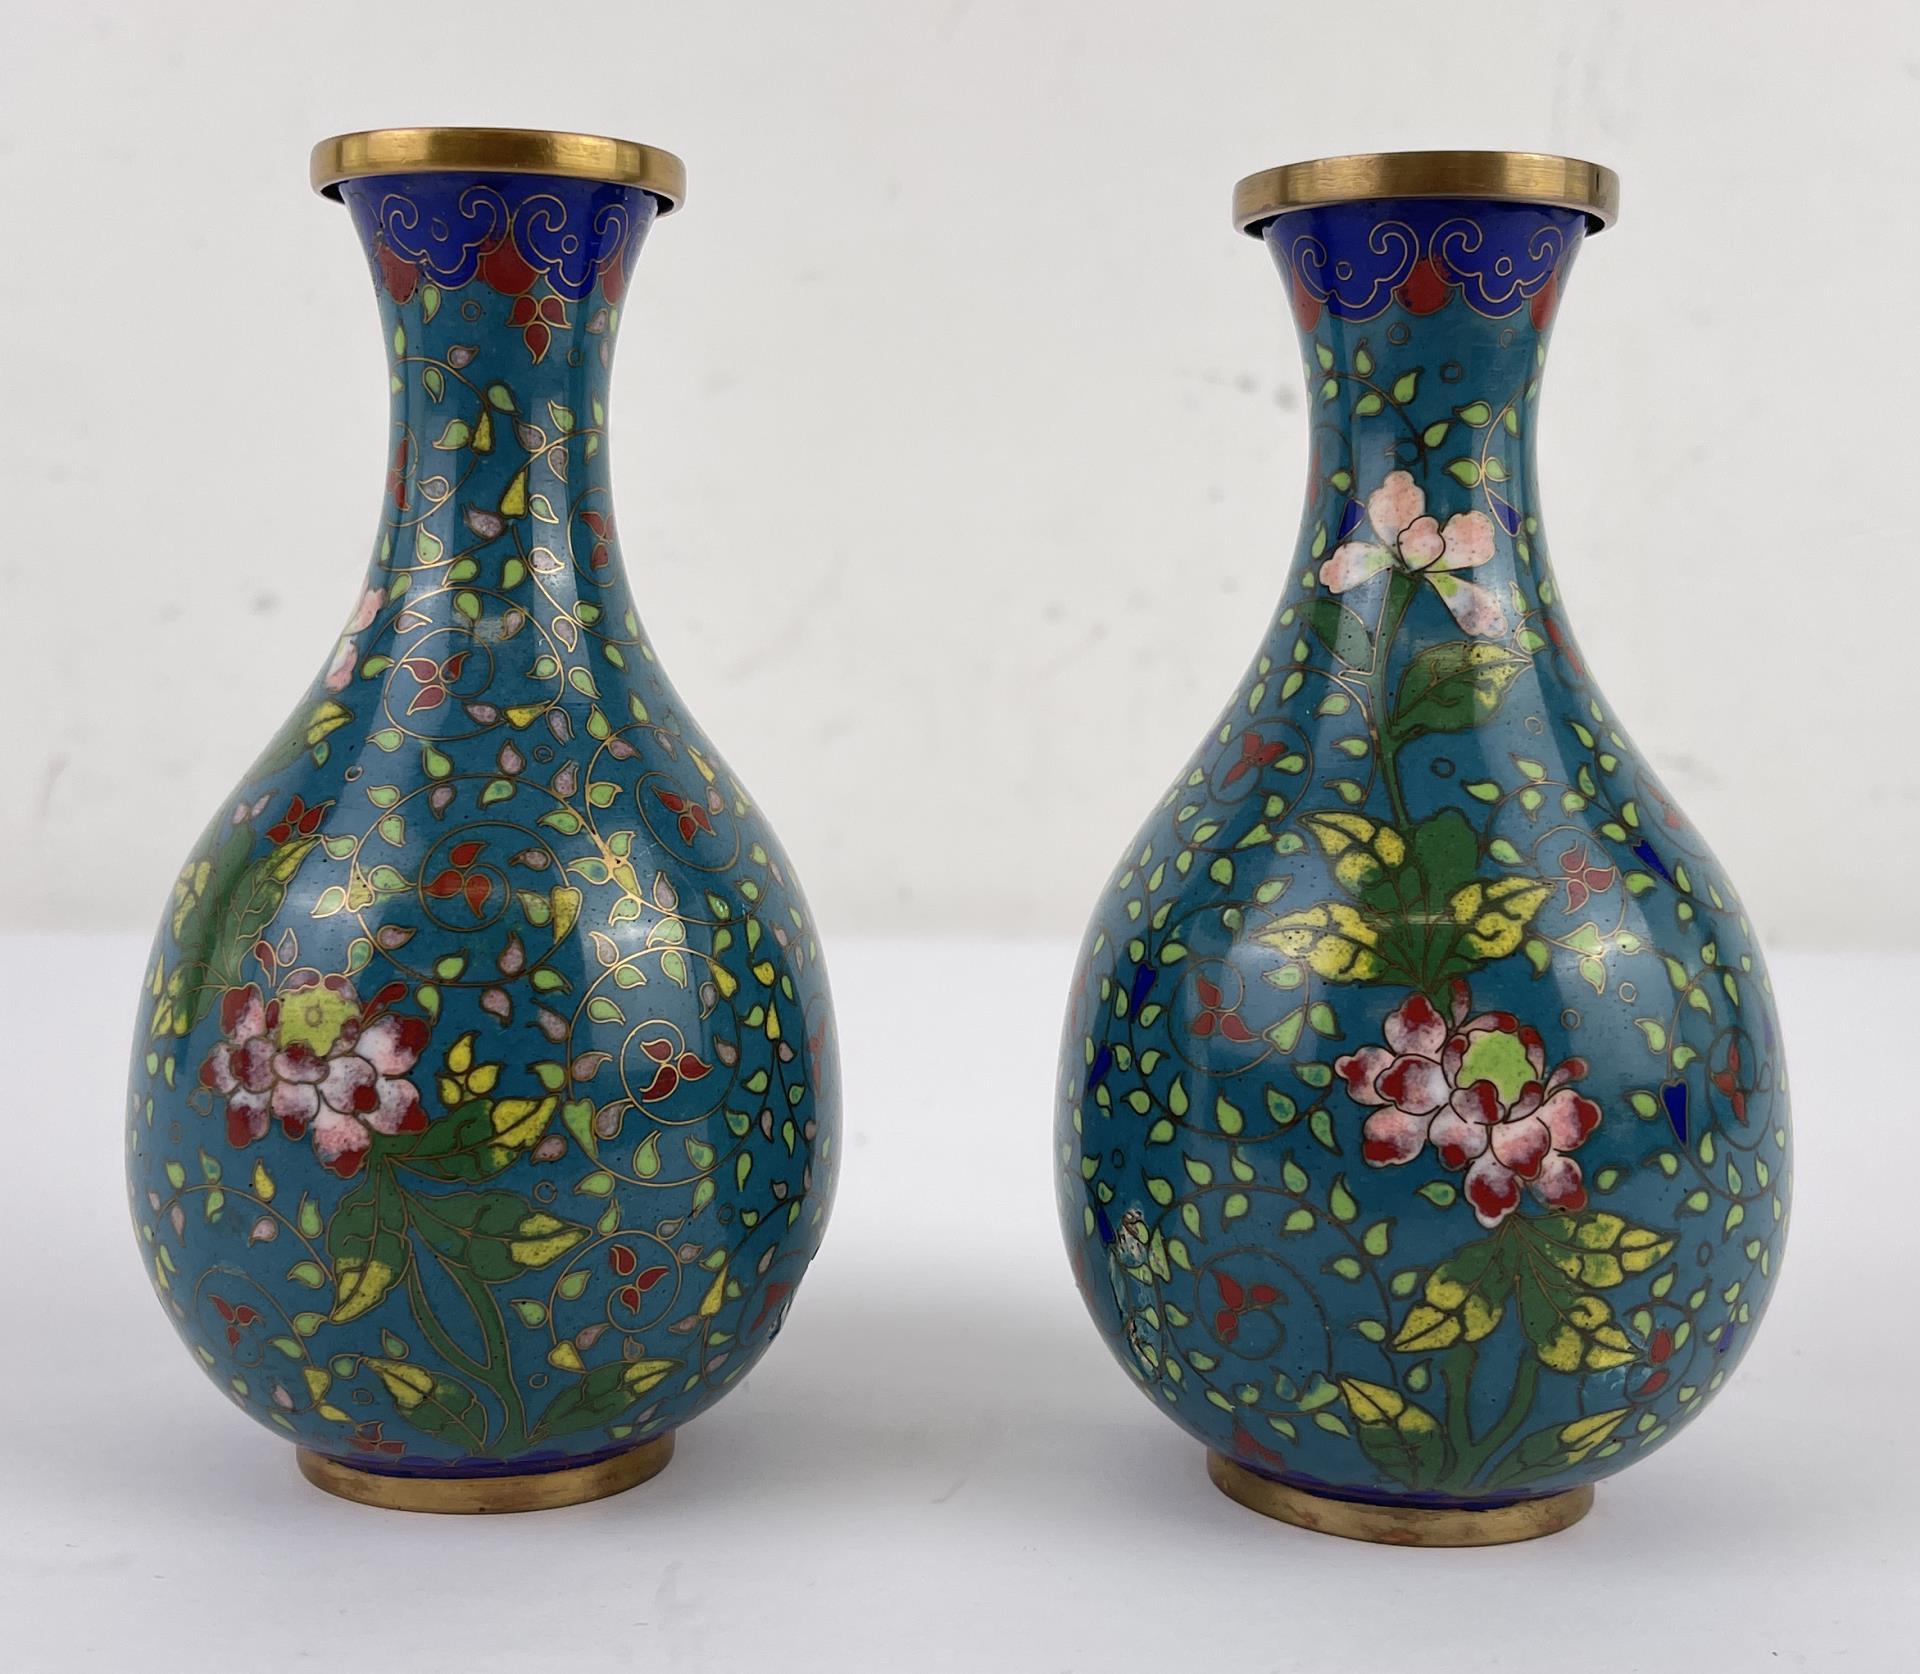 Pair of Antique Chinese Cloisonne Vases